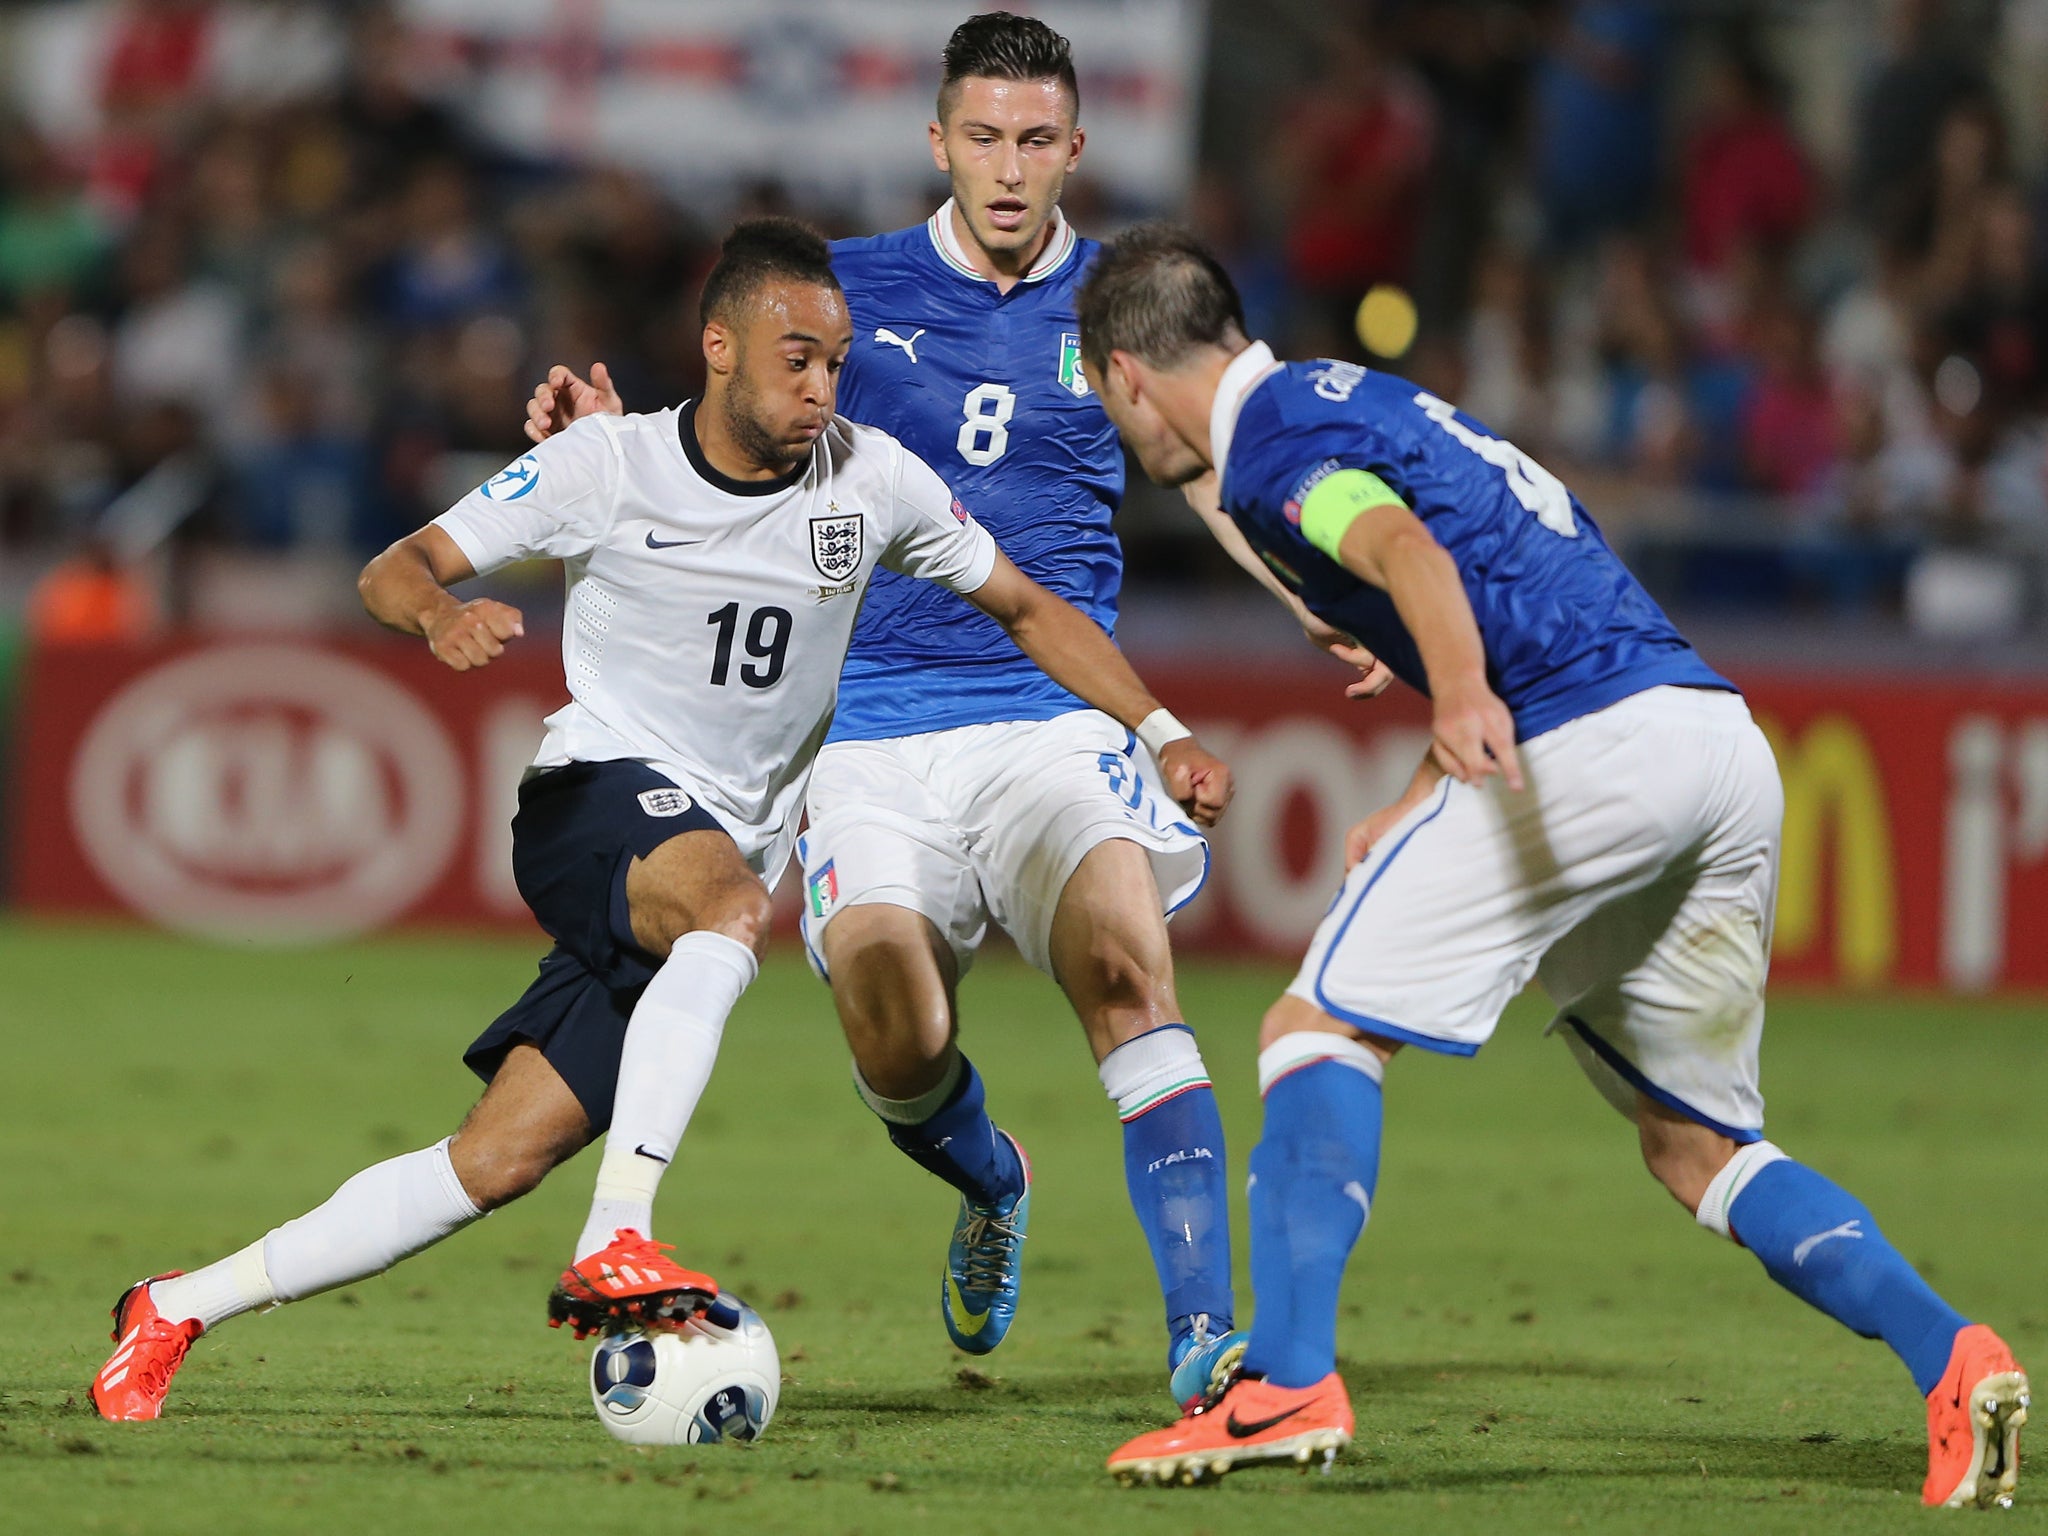 Nathan Redmond in action for England U21's at the European Championships in Israel